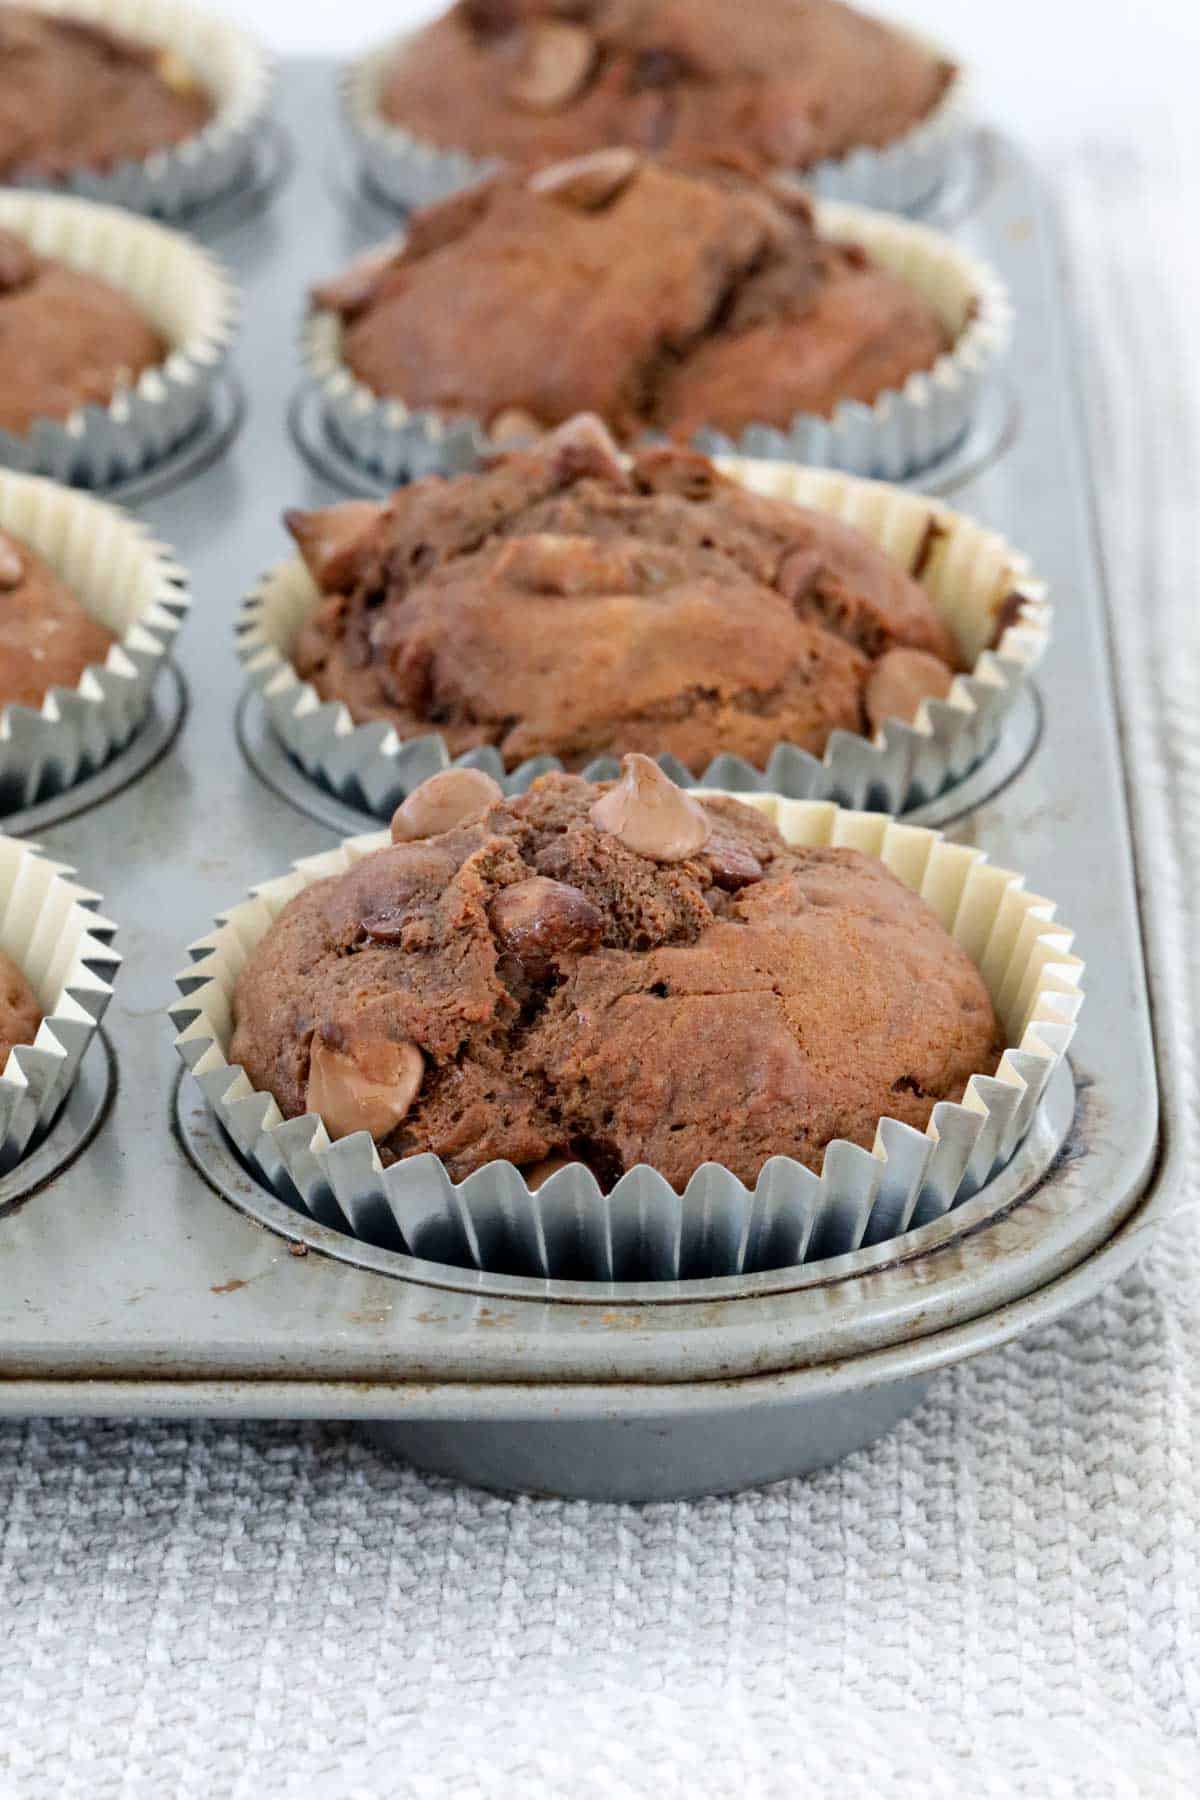 Silver muffin cases encasing chocolate banana muffins in a baking tray.